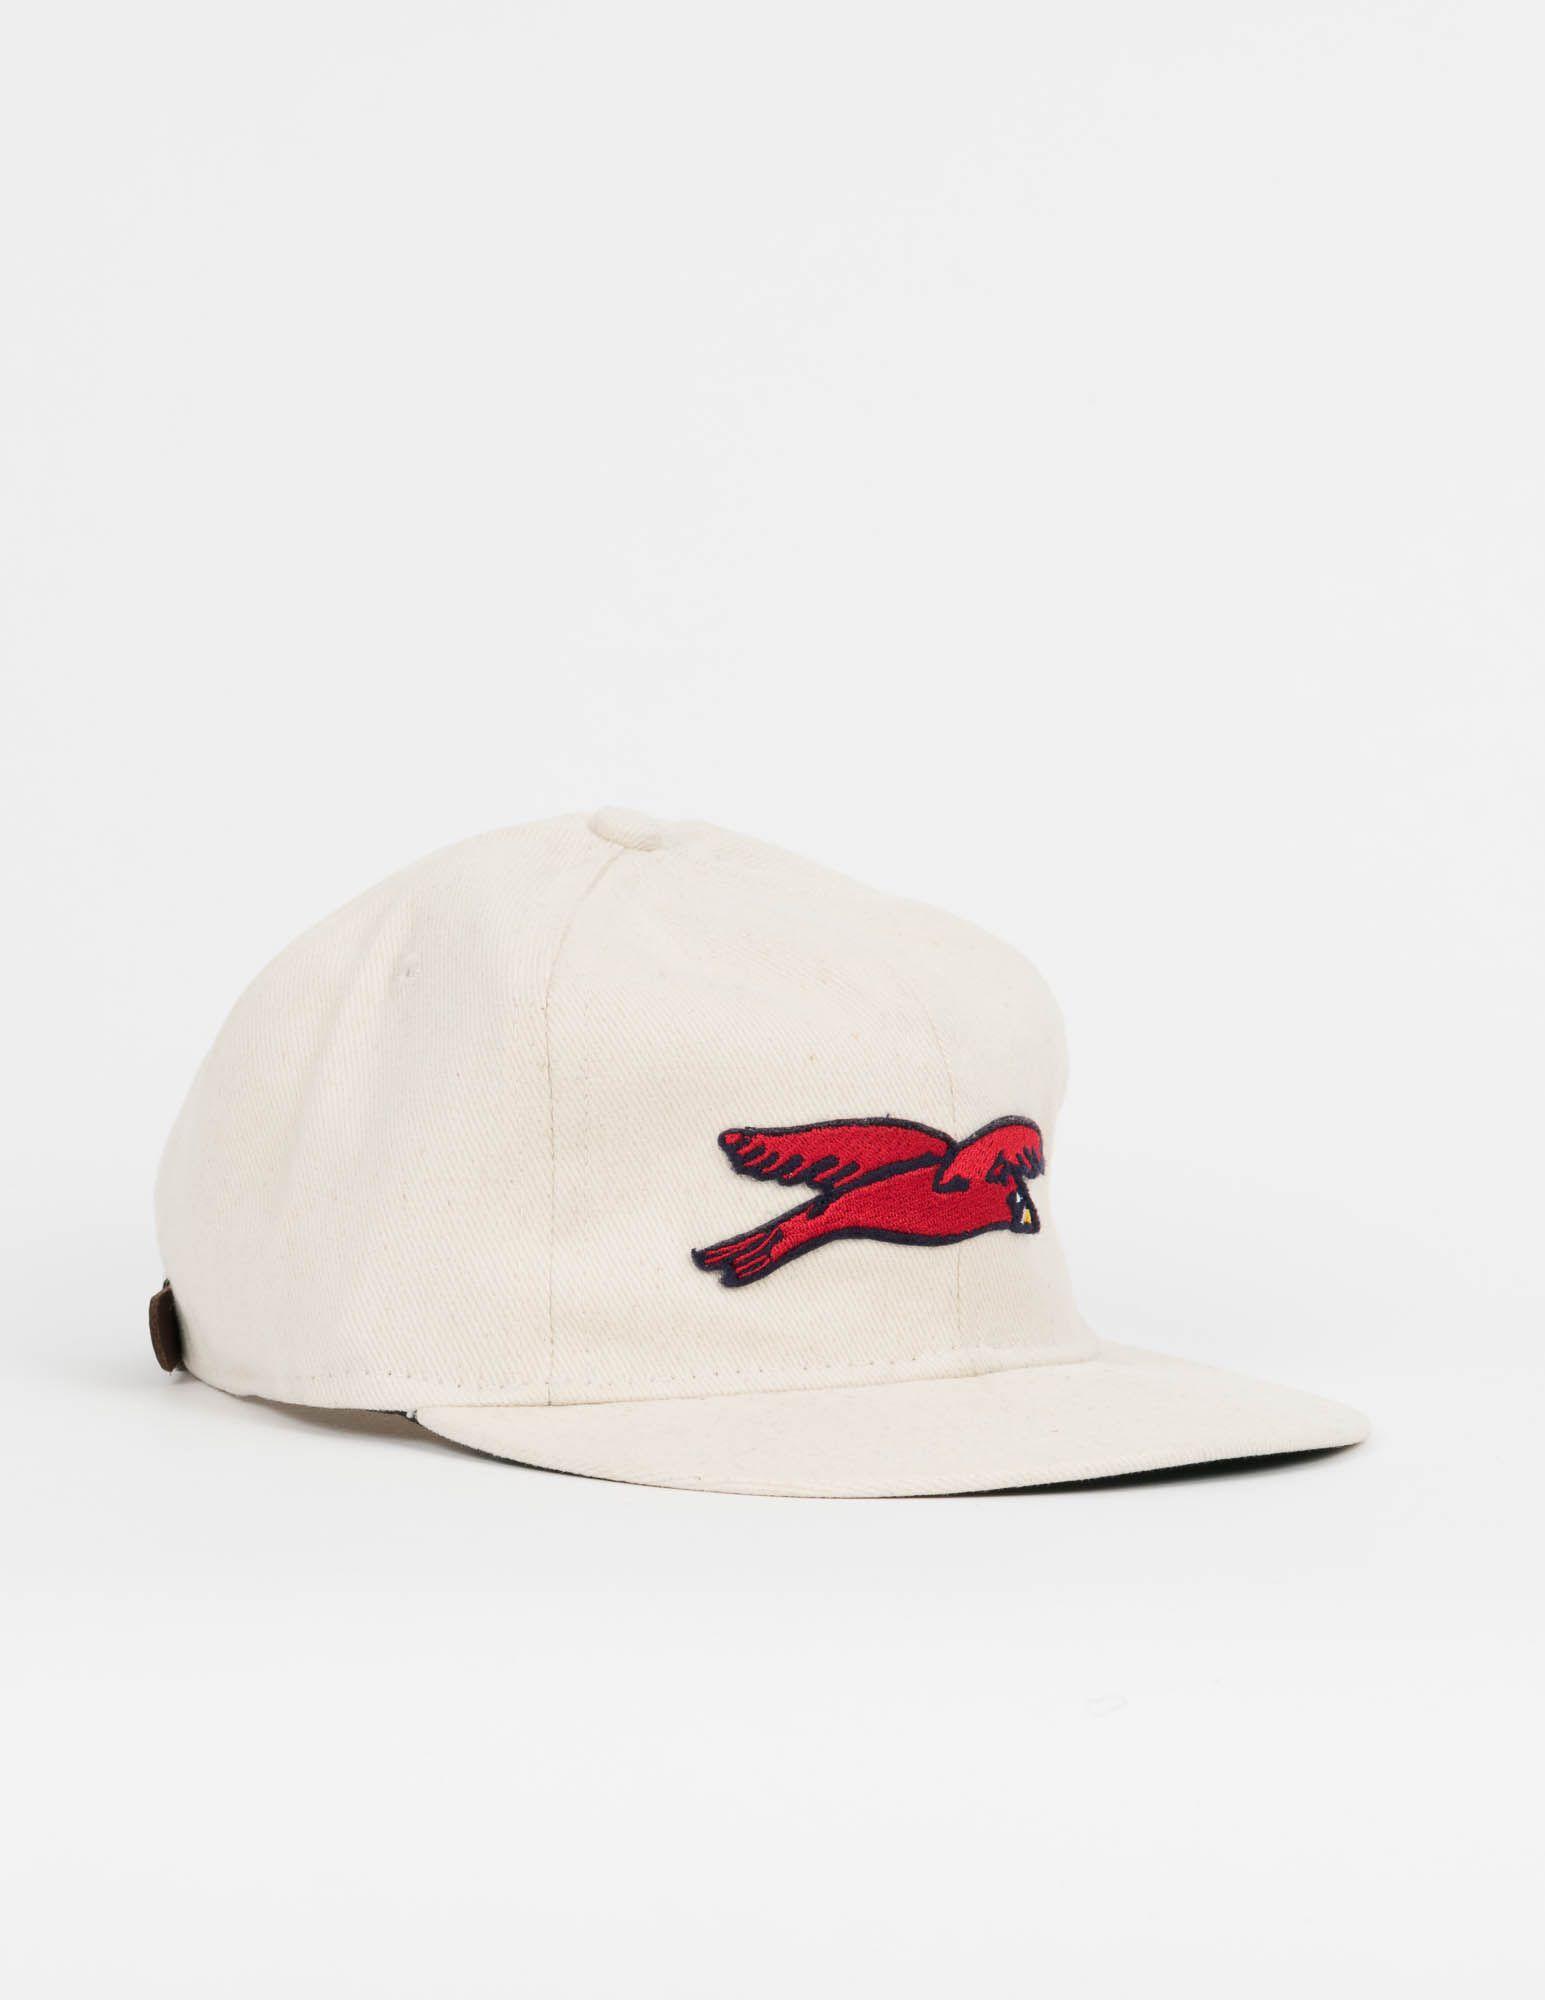 Columbus Red Birds Logo - Ebbets Field Flannels Columbus Red Birds 1937 Brushed Chino Twill